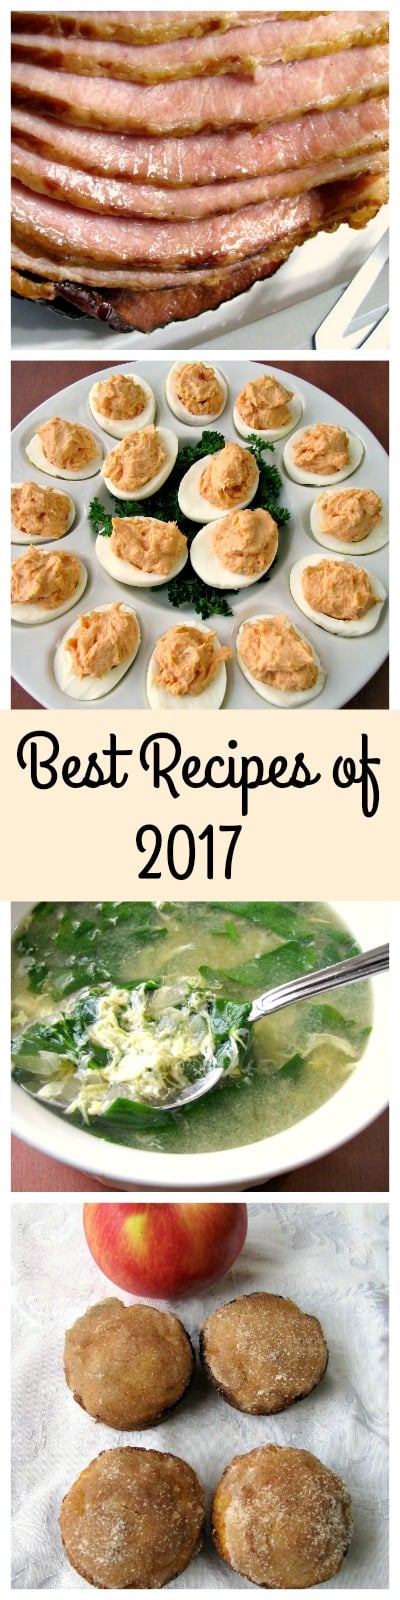 The Best Recipes of 2017 (Spring) including Slow Cooker Honey Ham, Smoked Salmon Deviled Eggs, Spinach Egg Drop Soup, and Cinnamon Sugar Apple Muffins. 